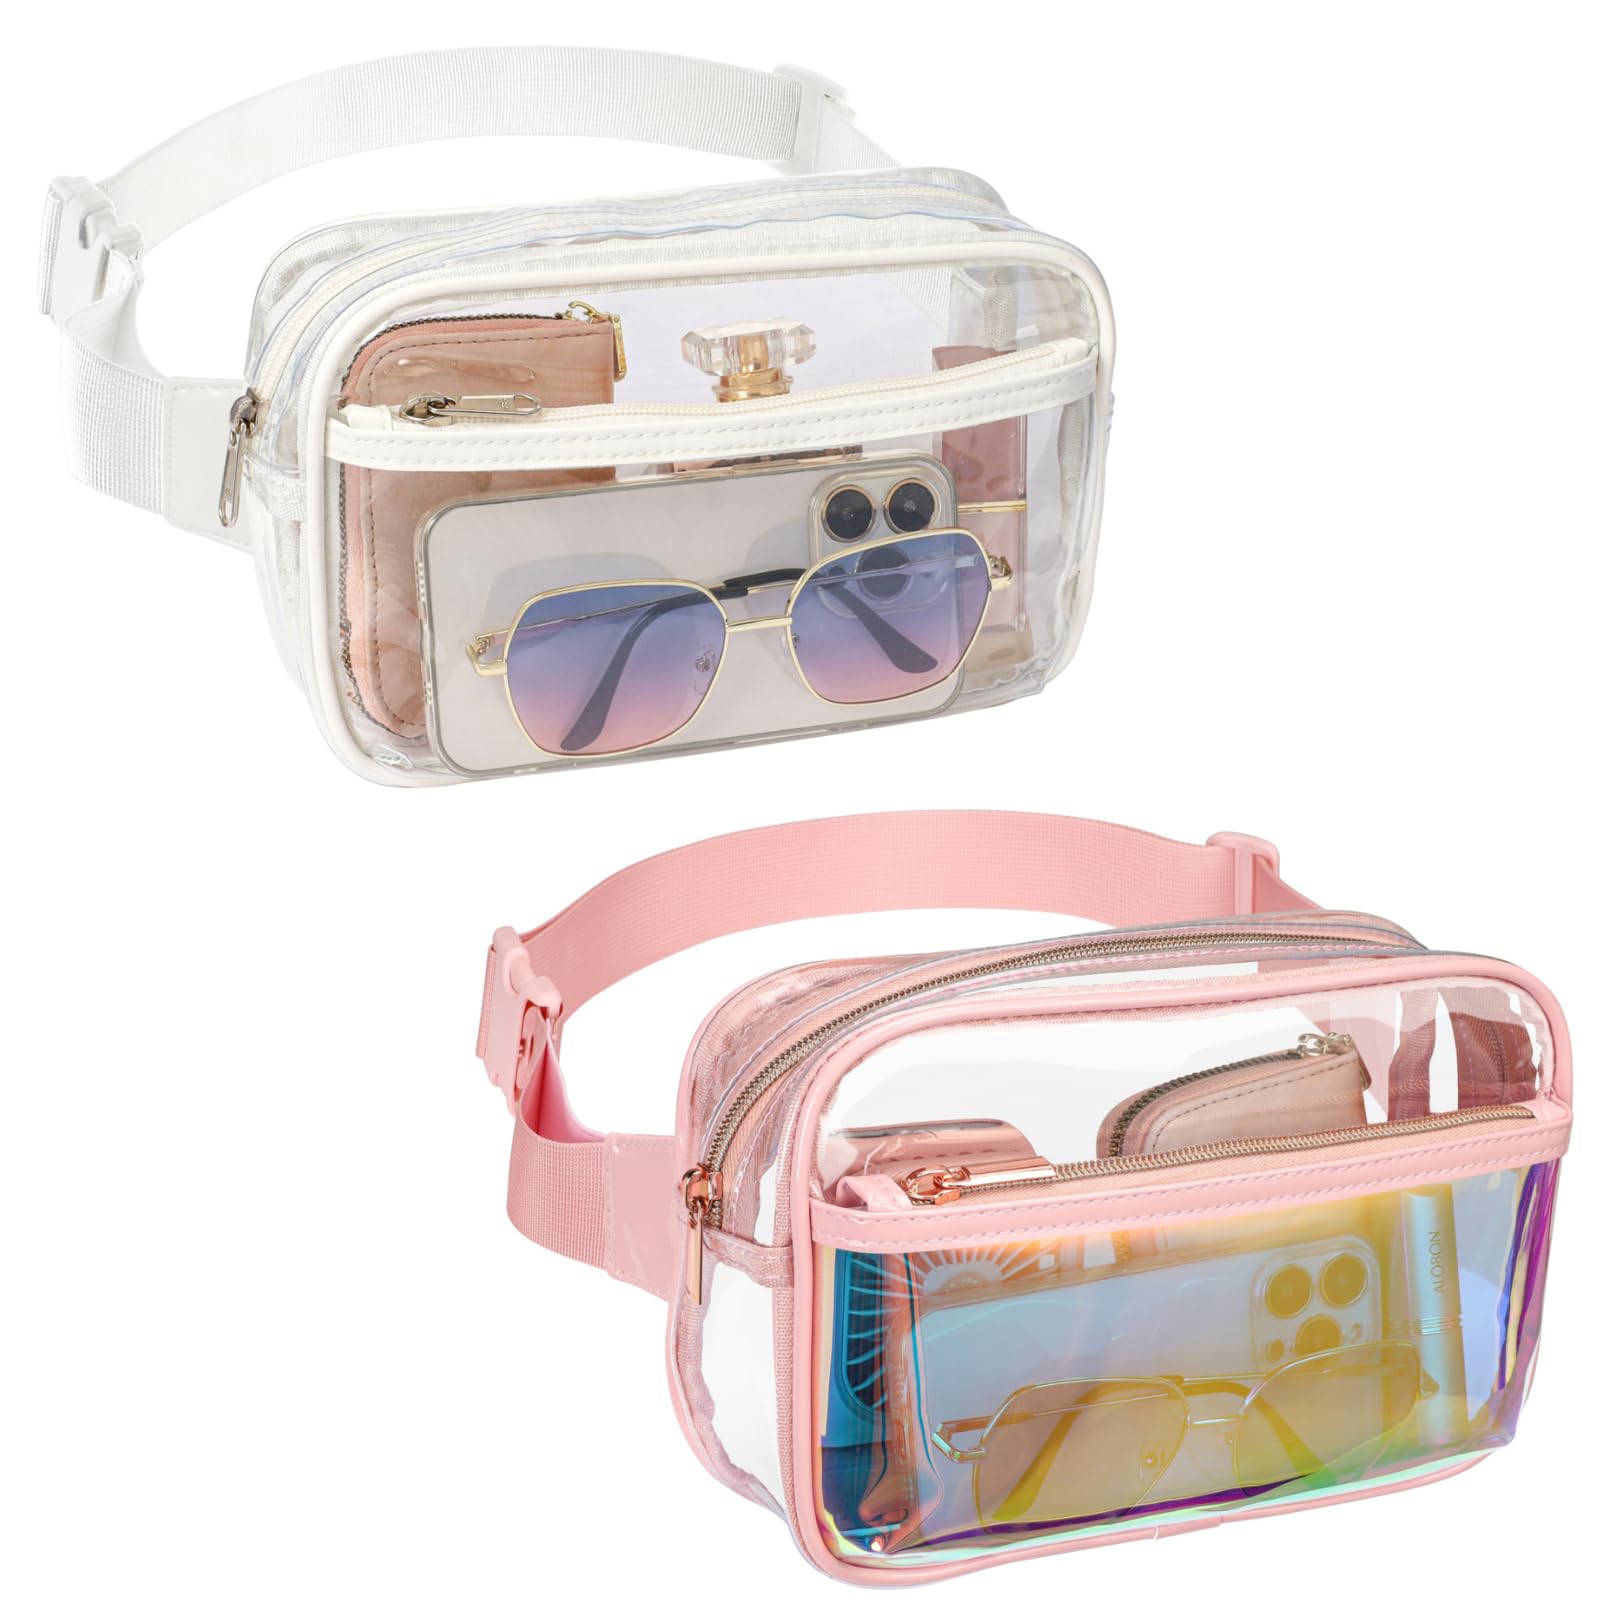 Veckle Clear Fanny Pack Stadium Approved - Bundle Sale